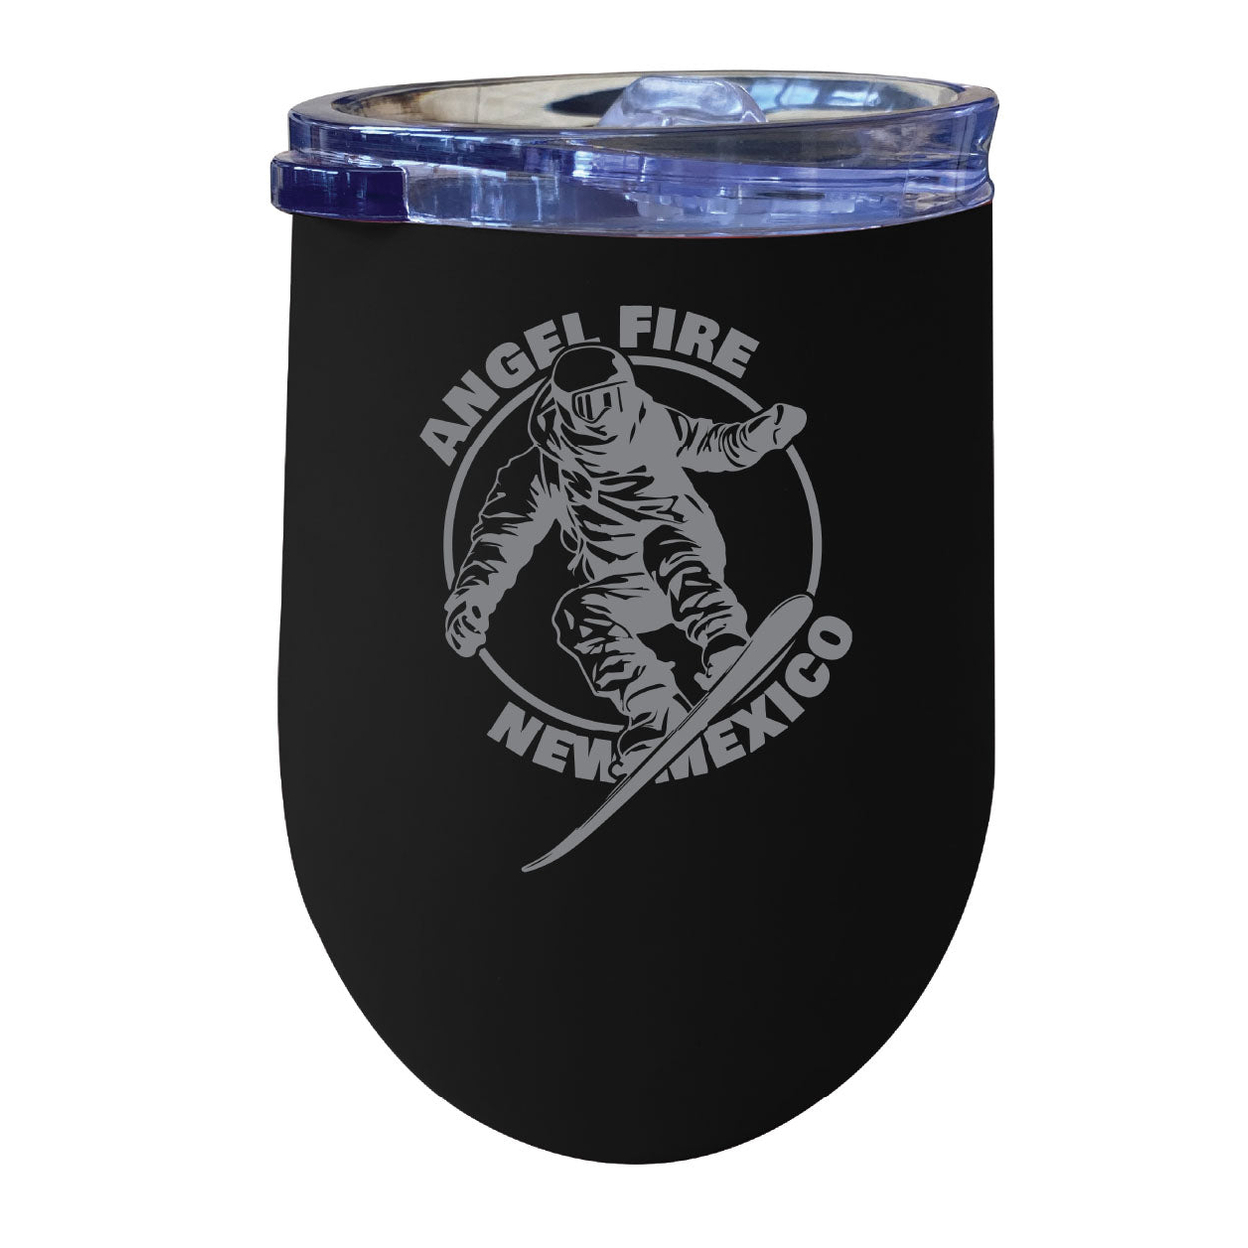 Angel Fire New Mexico Souvenir 12 Oz Engraved Insulated Wine Stainless Steel Tumbler - Black,,4-Pack